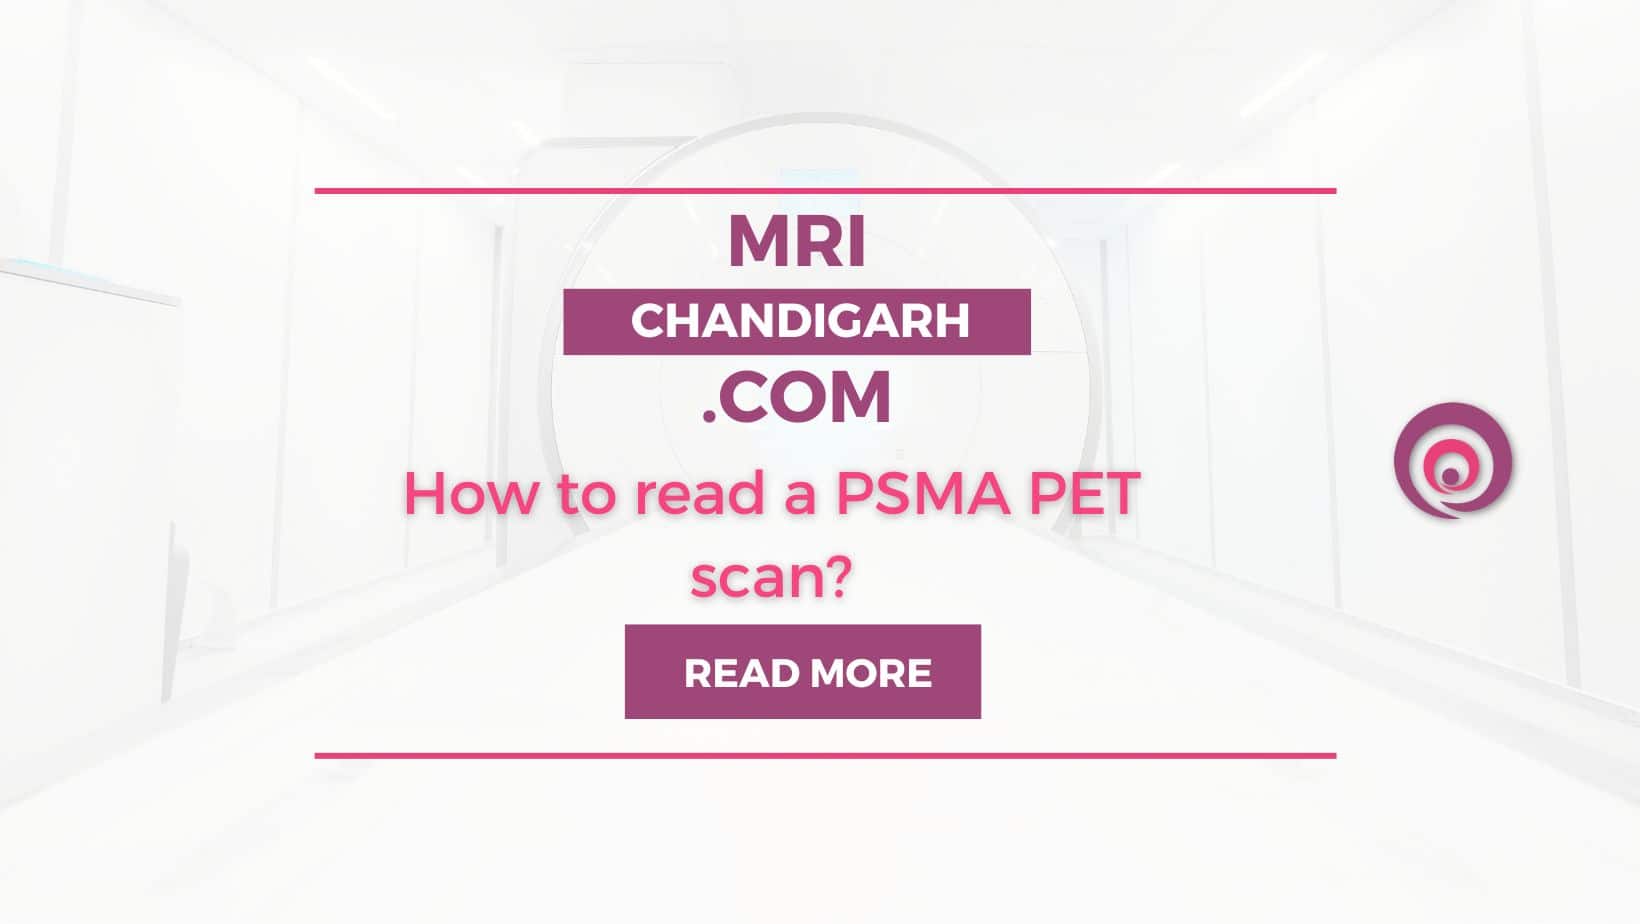 How to read a PSMA PET scan?